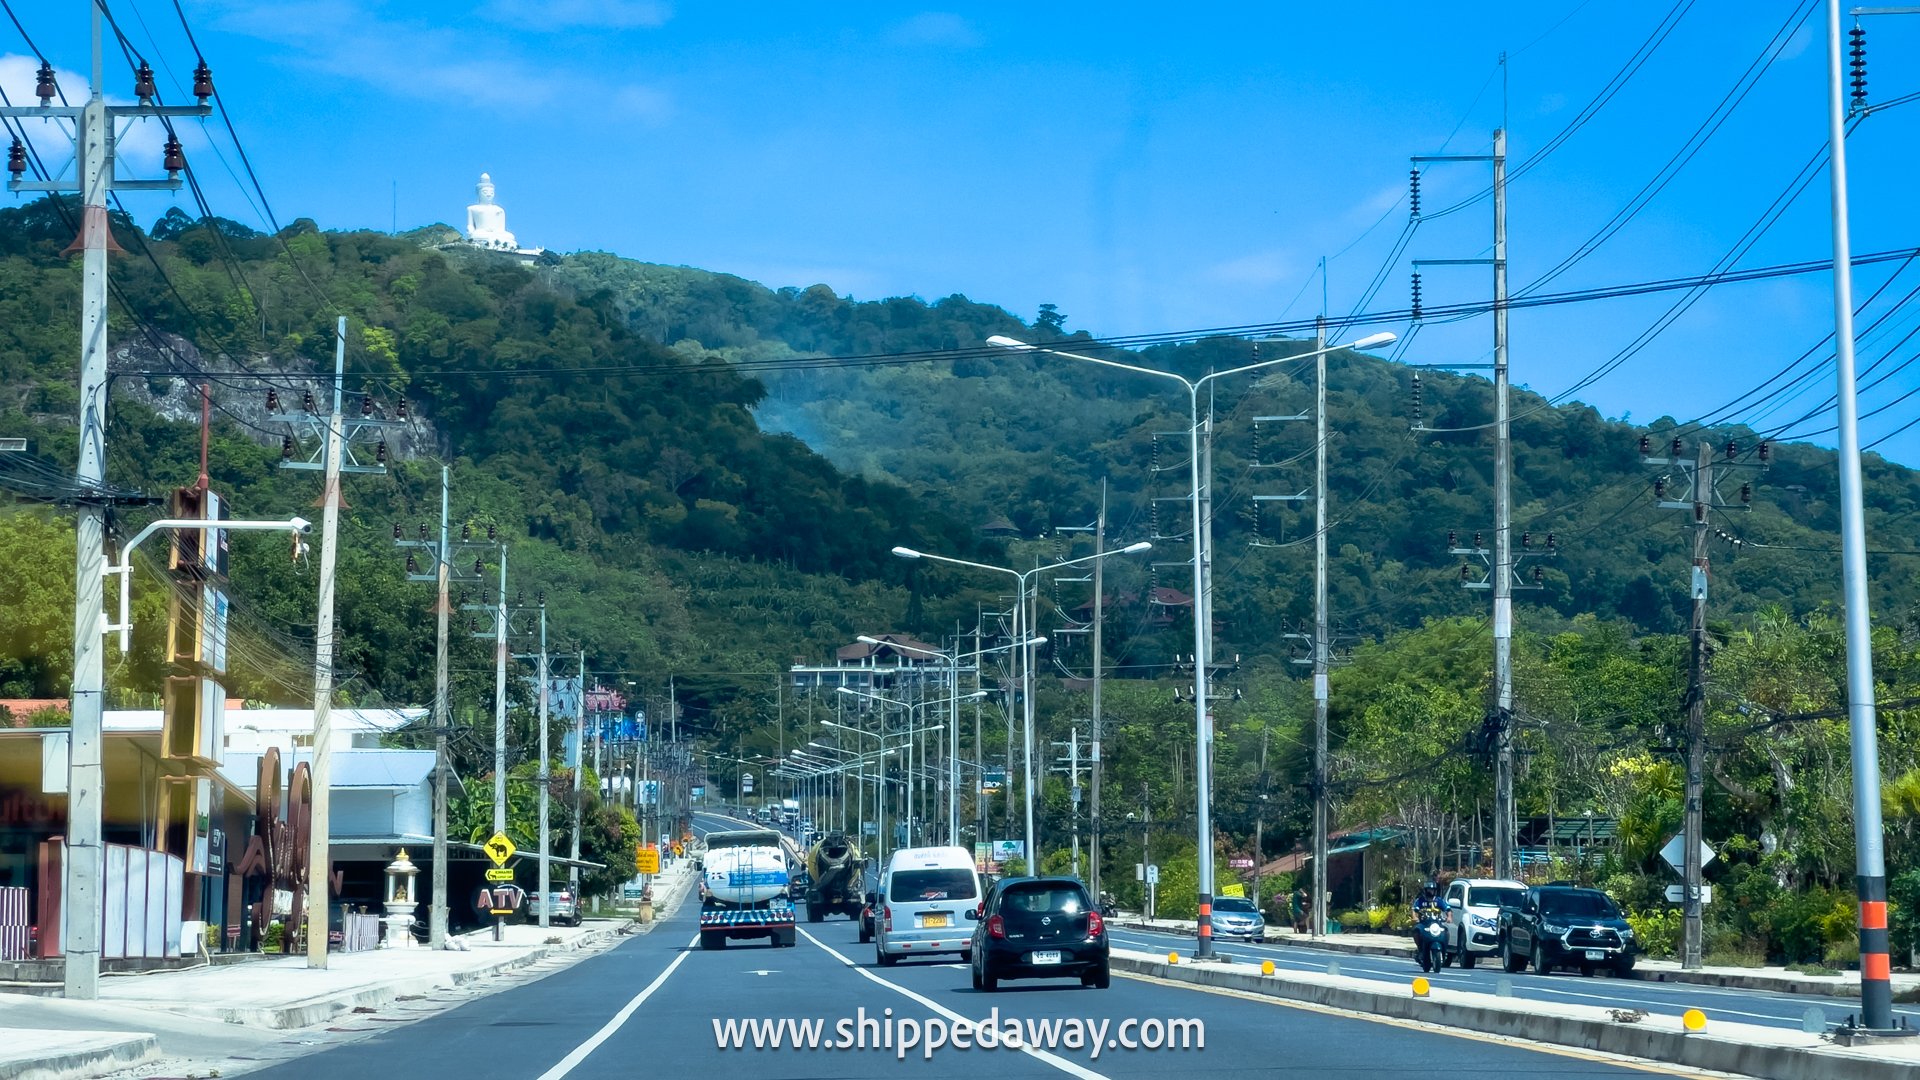 Big Buddha seen from a road in Chalong, Phuket, Thailand